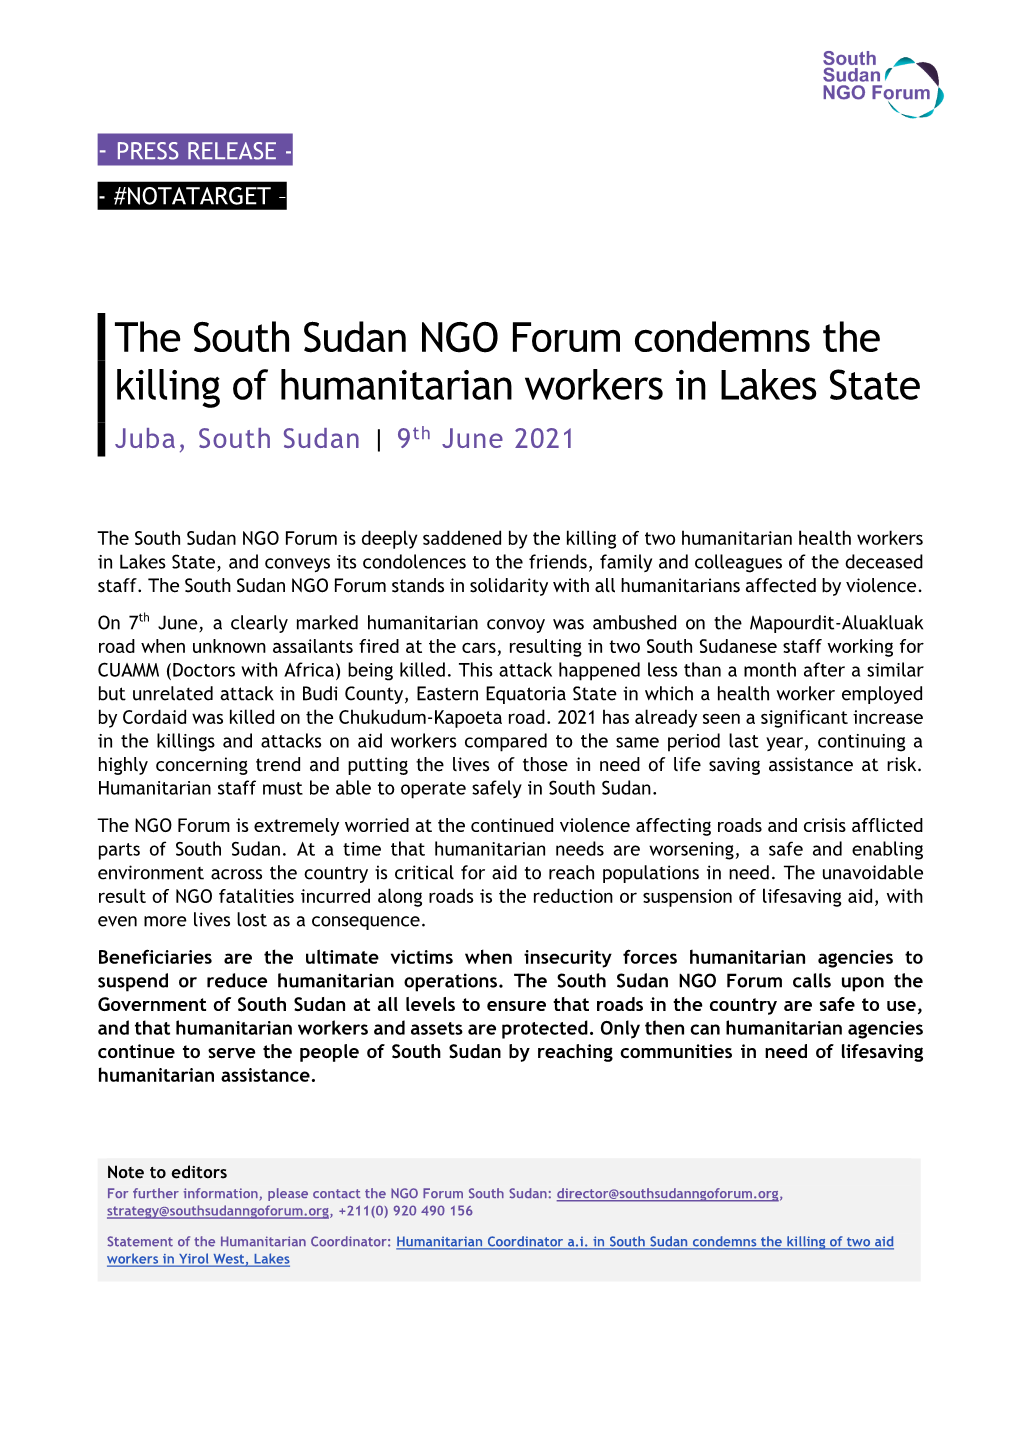 South Sudan NGO Forum Condemns the Killing of Humanitarian Workers in Lakes State Juba, South Sudan | 9Th June 2021